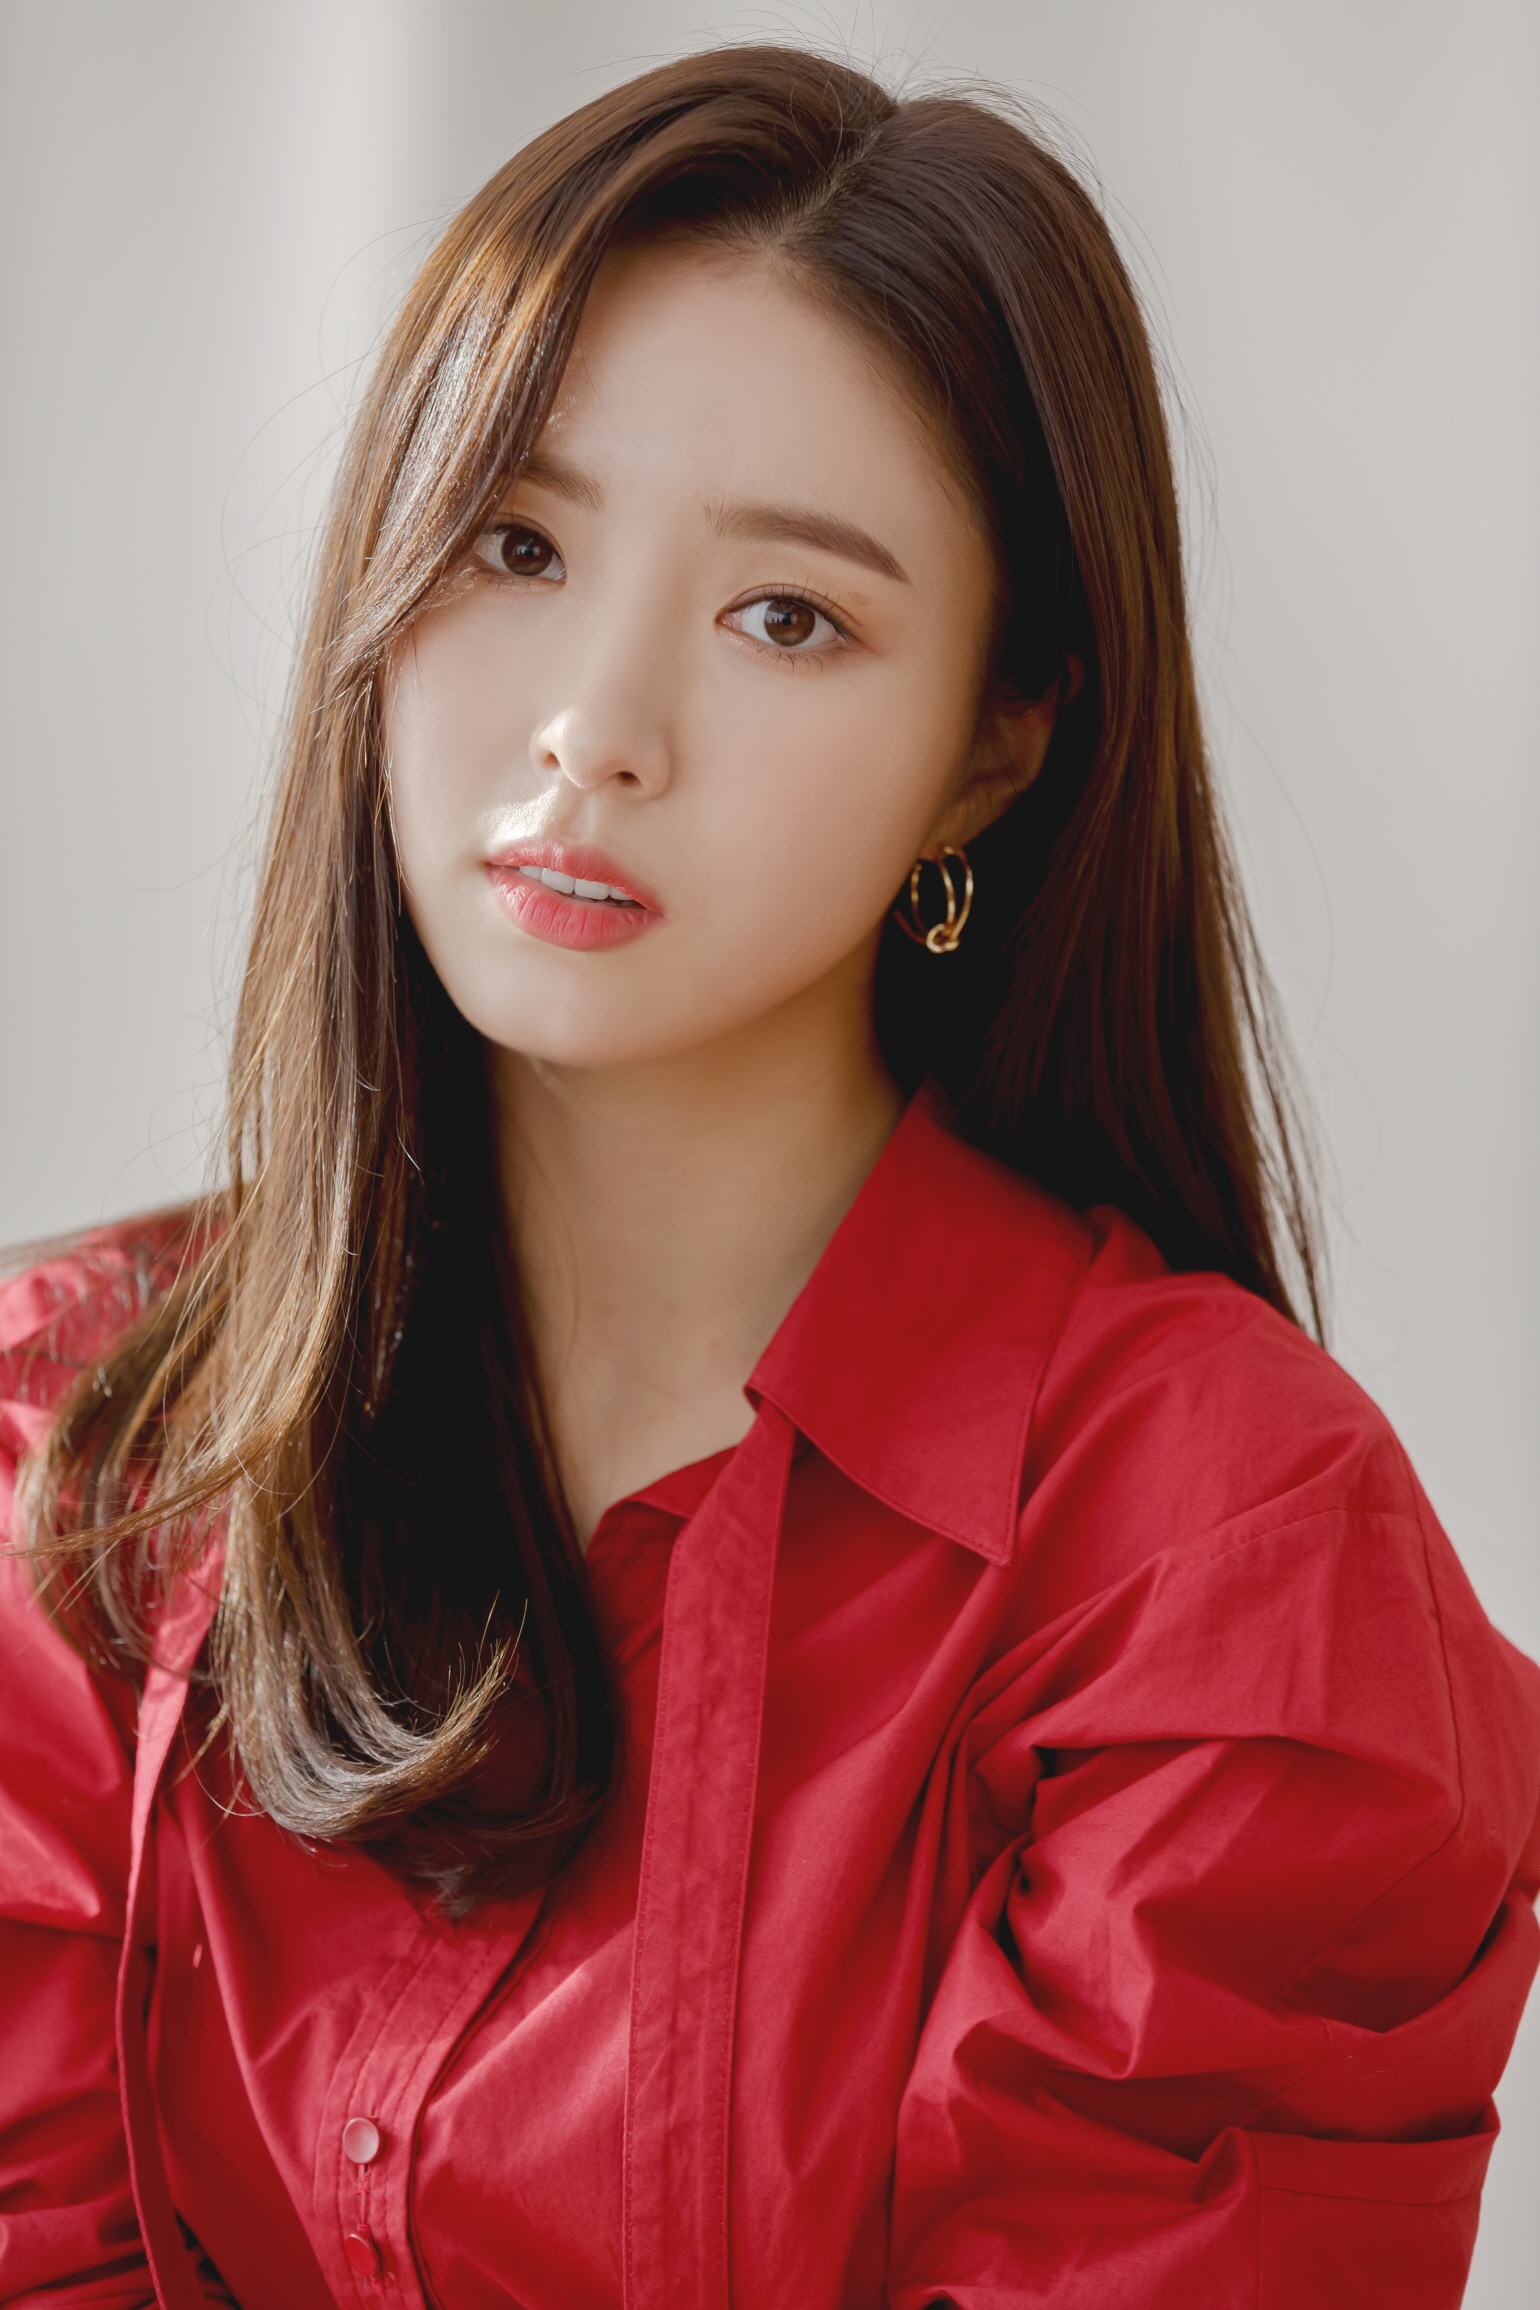 Actor Shin Se-kyung has confirmed his appearance on JTBCs new Drama Run On.Actor Shin Se-kyung will make a comeback as Oh miju, the main character of JTBCs new drama Run-on in the second half of this year. Run-on is a romance drama featuring the love of two men and women.Shin Se-kyung plays a foreign currency translator with an enterprising tendency and a candid youth Oh miju with emotion.Shin Se-kyung hopes how Shin Se-kyung will express the coolness of the Americas, which has a good sense of reality and good and dislike.The news that Shin Se-kyung is coming back as a romance drama made the Drama fans happy who had been waiting for Shin Se-kyungs melodrama.As an actor who emits a bright and lovely charm but draws a suction force with lyrical eyes, the wind that I want to see Shin Se-kyungs romance was achieved.The Shin Se-kyung actor is qualified to express the three-dimensional appearance of youth, and I am looking forward to the romance of Shin Se-kyung now, said an official of Run-on.Shin Se-kyung debuted in 1998 as a poster model for the Seo Taiji Take 5, and was loved for appearing in High Kick Through the Roof, Deep Rooted Tree, Kwon Ryong I Narsa and Black Knight.The line has expanded the spectrum from thick historical drama to smooth romance, building the trust of viewers.Last year, he played a big role in MBC Drama New Entrepreneur Koo Hae-ryong and won the Grand Prize at the end of the year awards ceremony and became an actor who believes and sees.In addition, through the YouTube channel Jinsanuna, it was surprising that it was a different way to reveal small daily life.iMBC  Photos